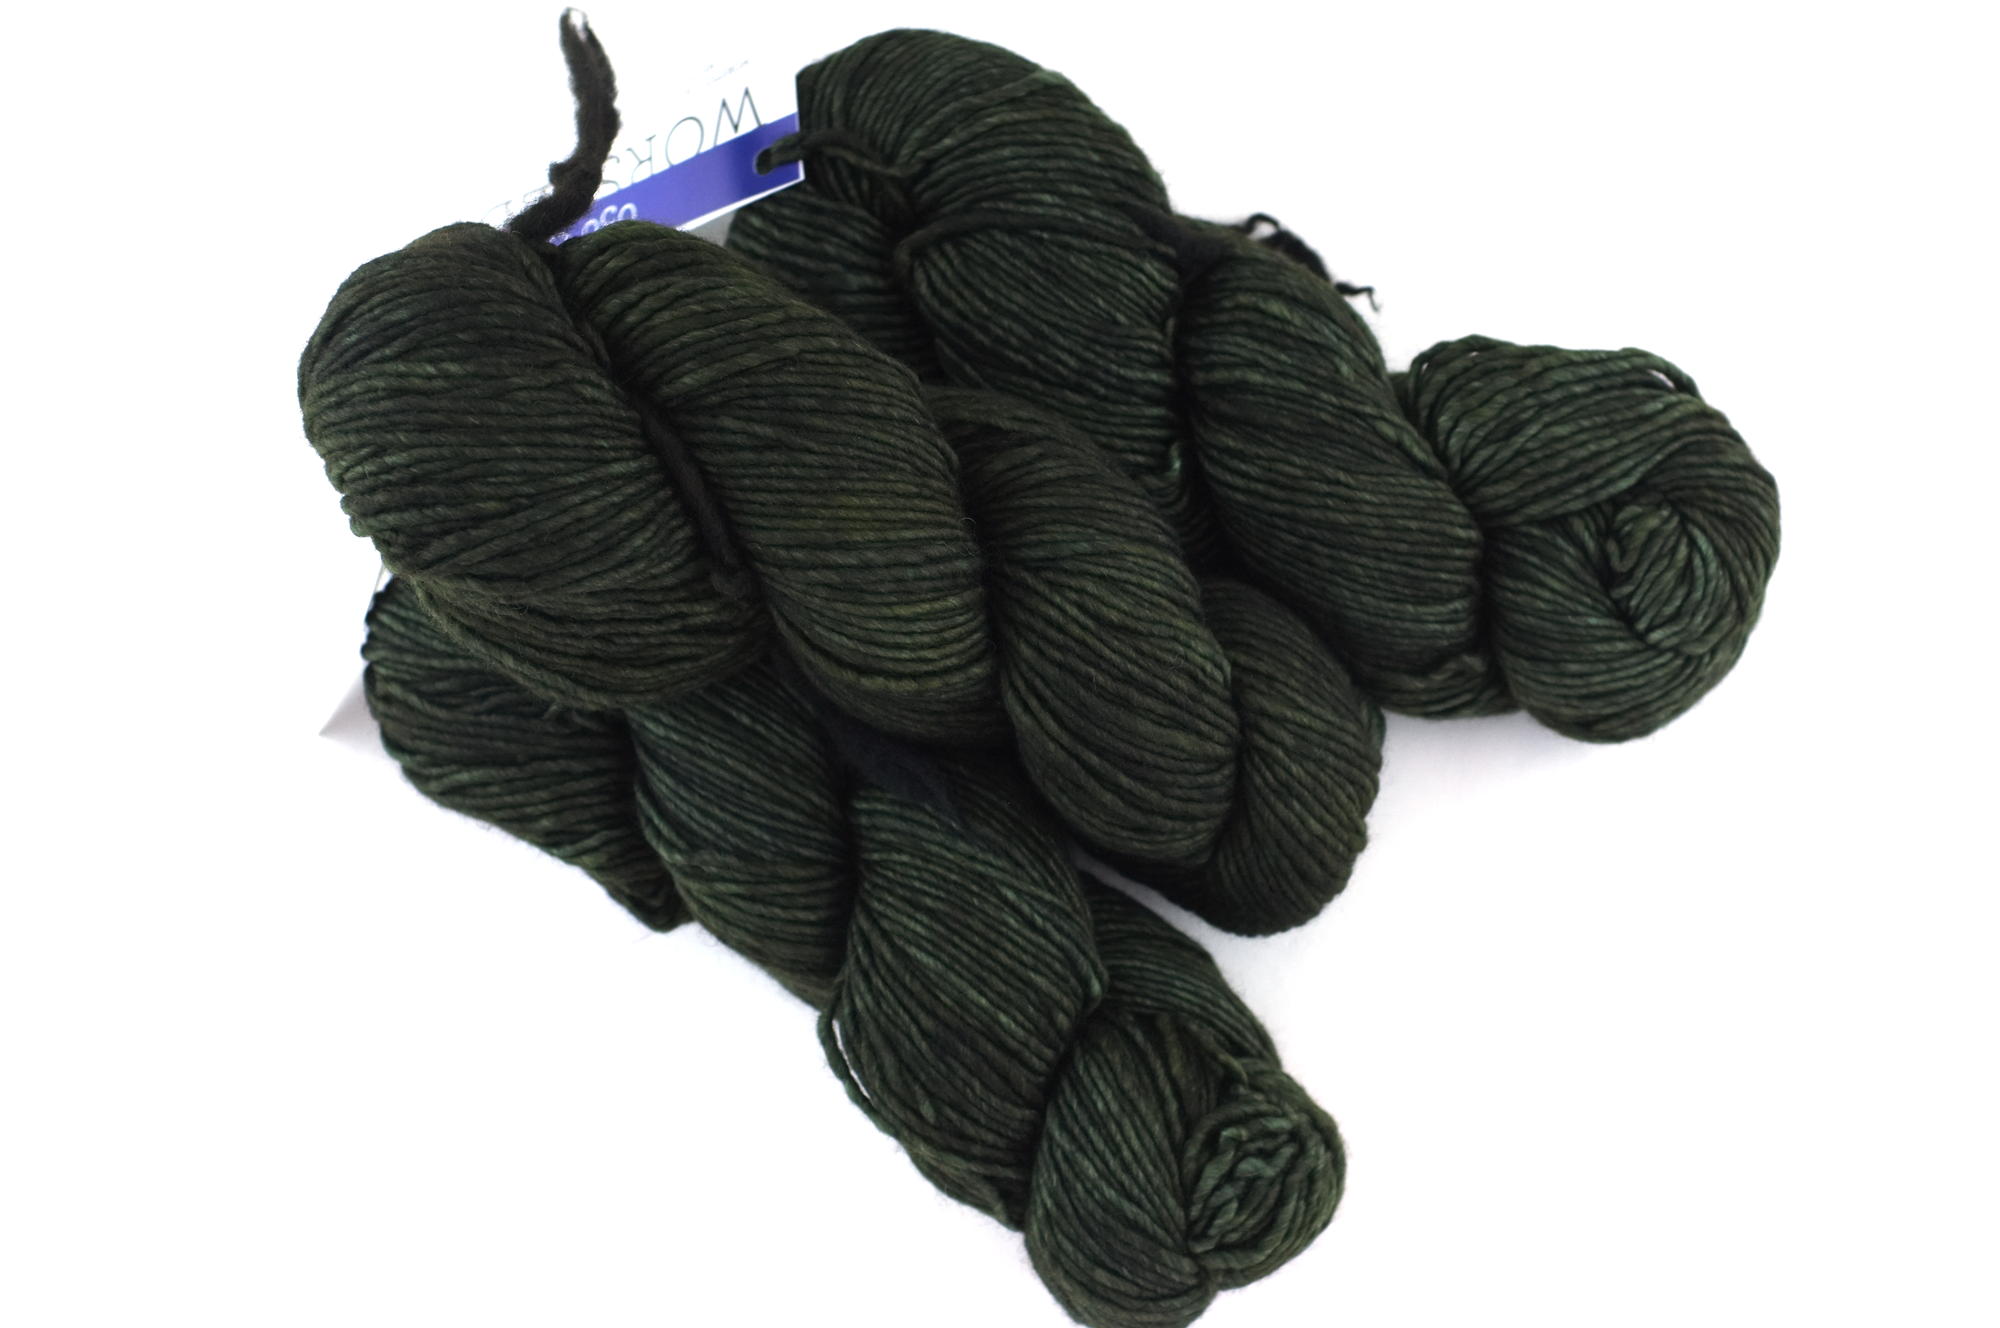 Malabrigo Worsted in color Olive, #056, Merino Wool Aran Weight Knitting  Yarn, deep olive green Red Beauty Textiles